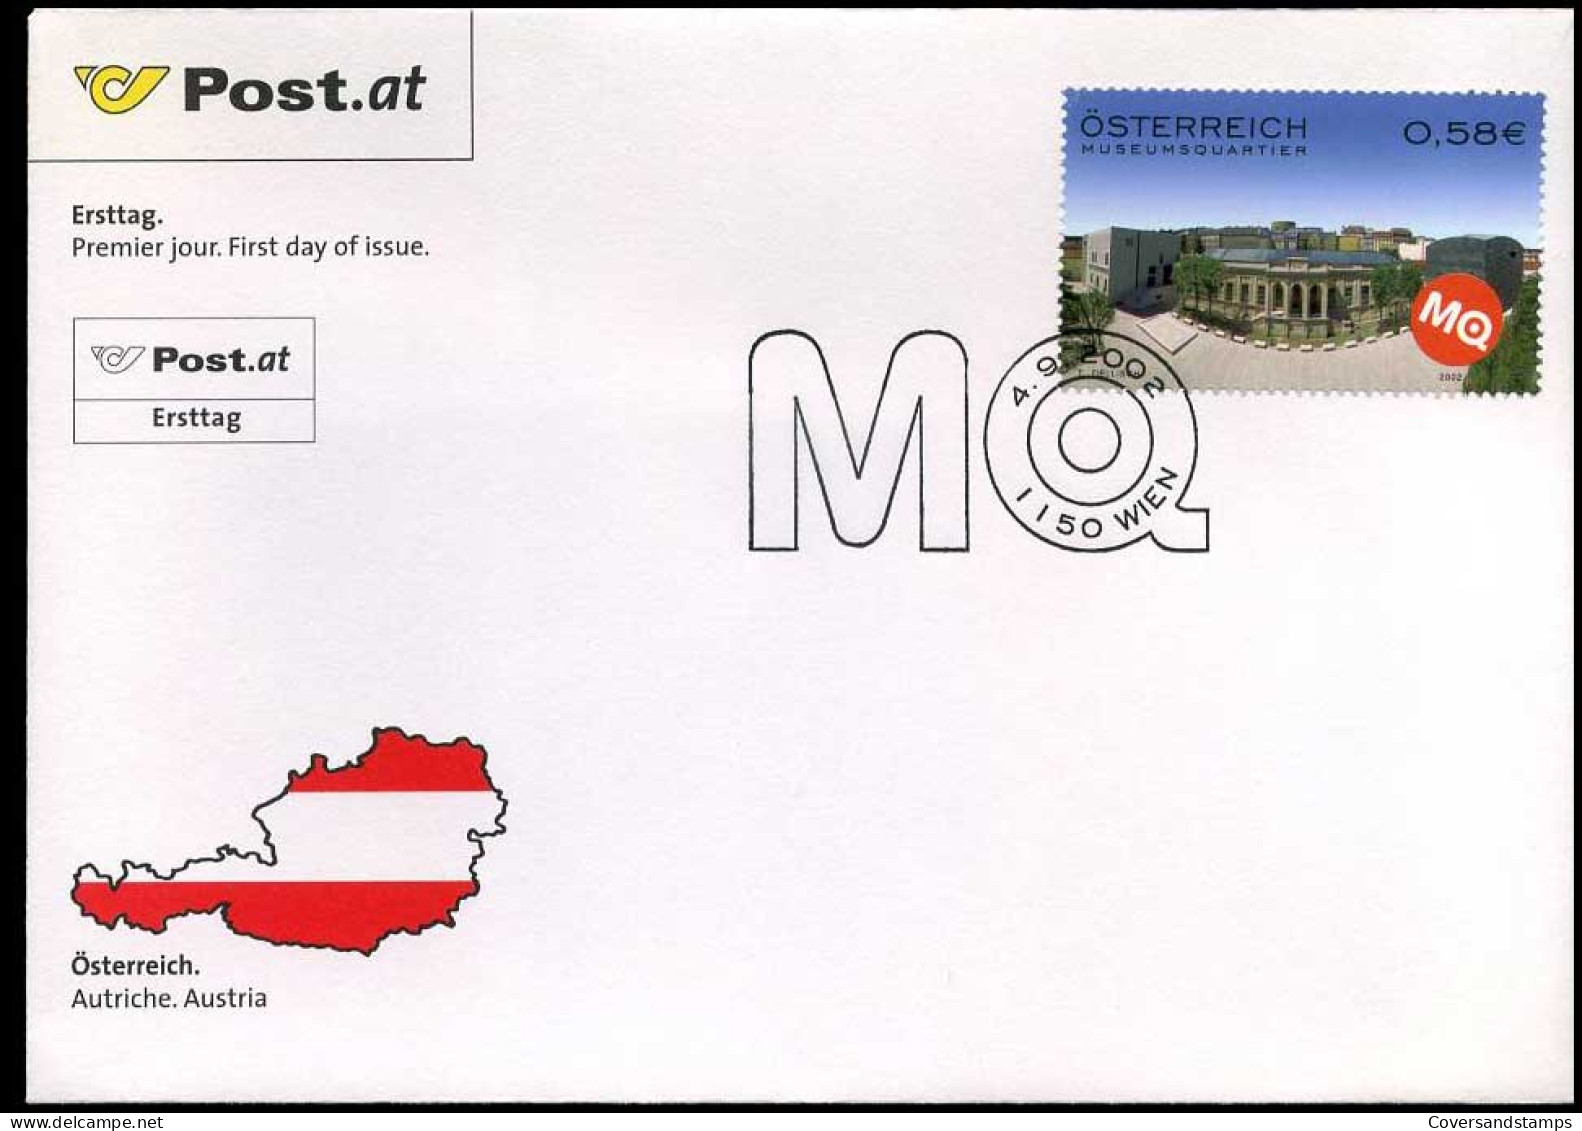 Oostenrijk - FDC - Museumsquartier                                         - FDC